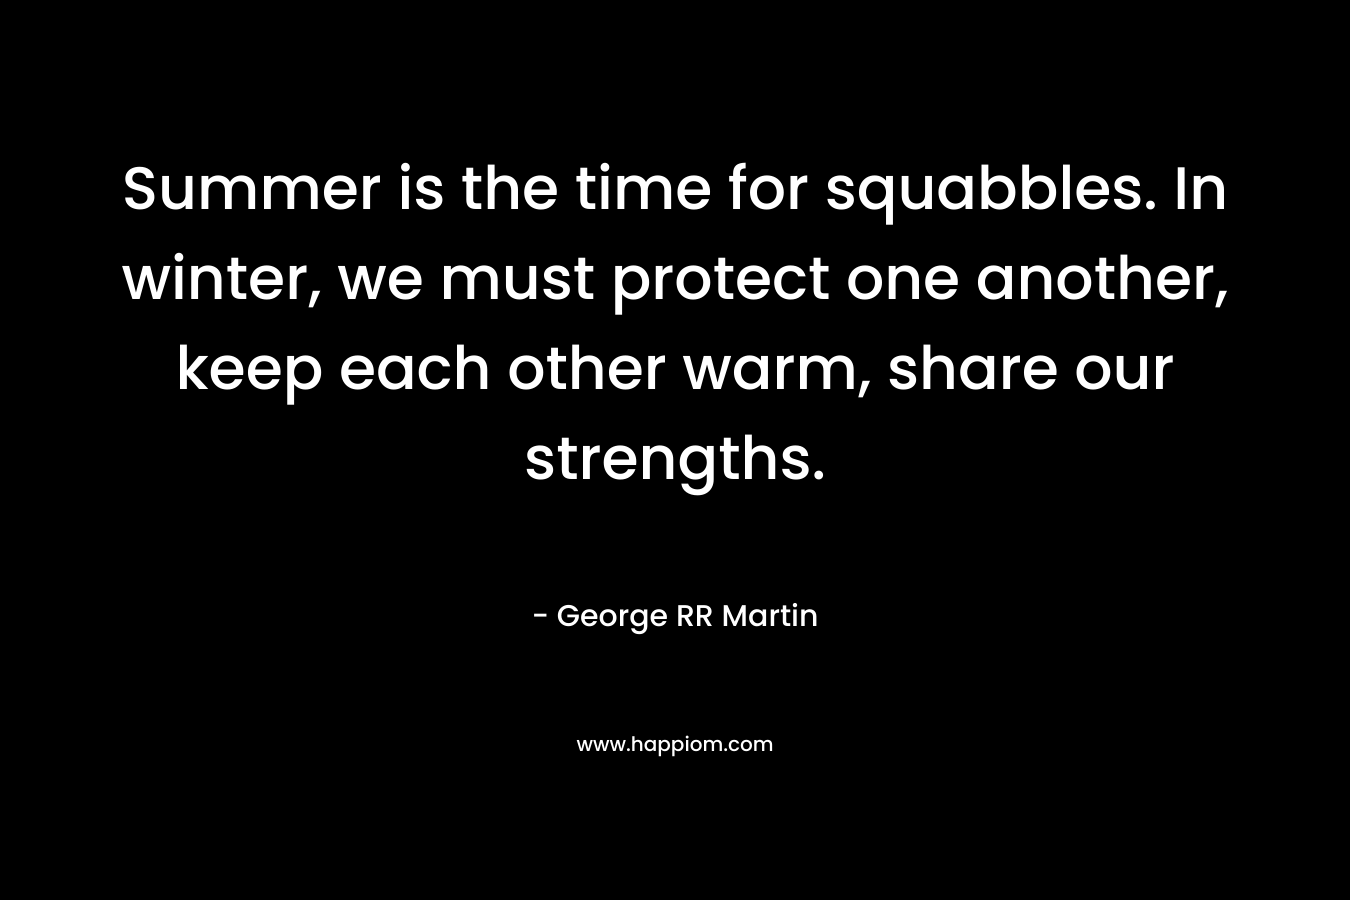 Summer is the time for squabbles. In winter, we must protect one another, keep each other warm, share our strengths.